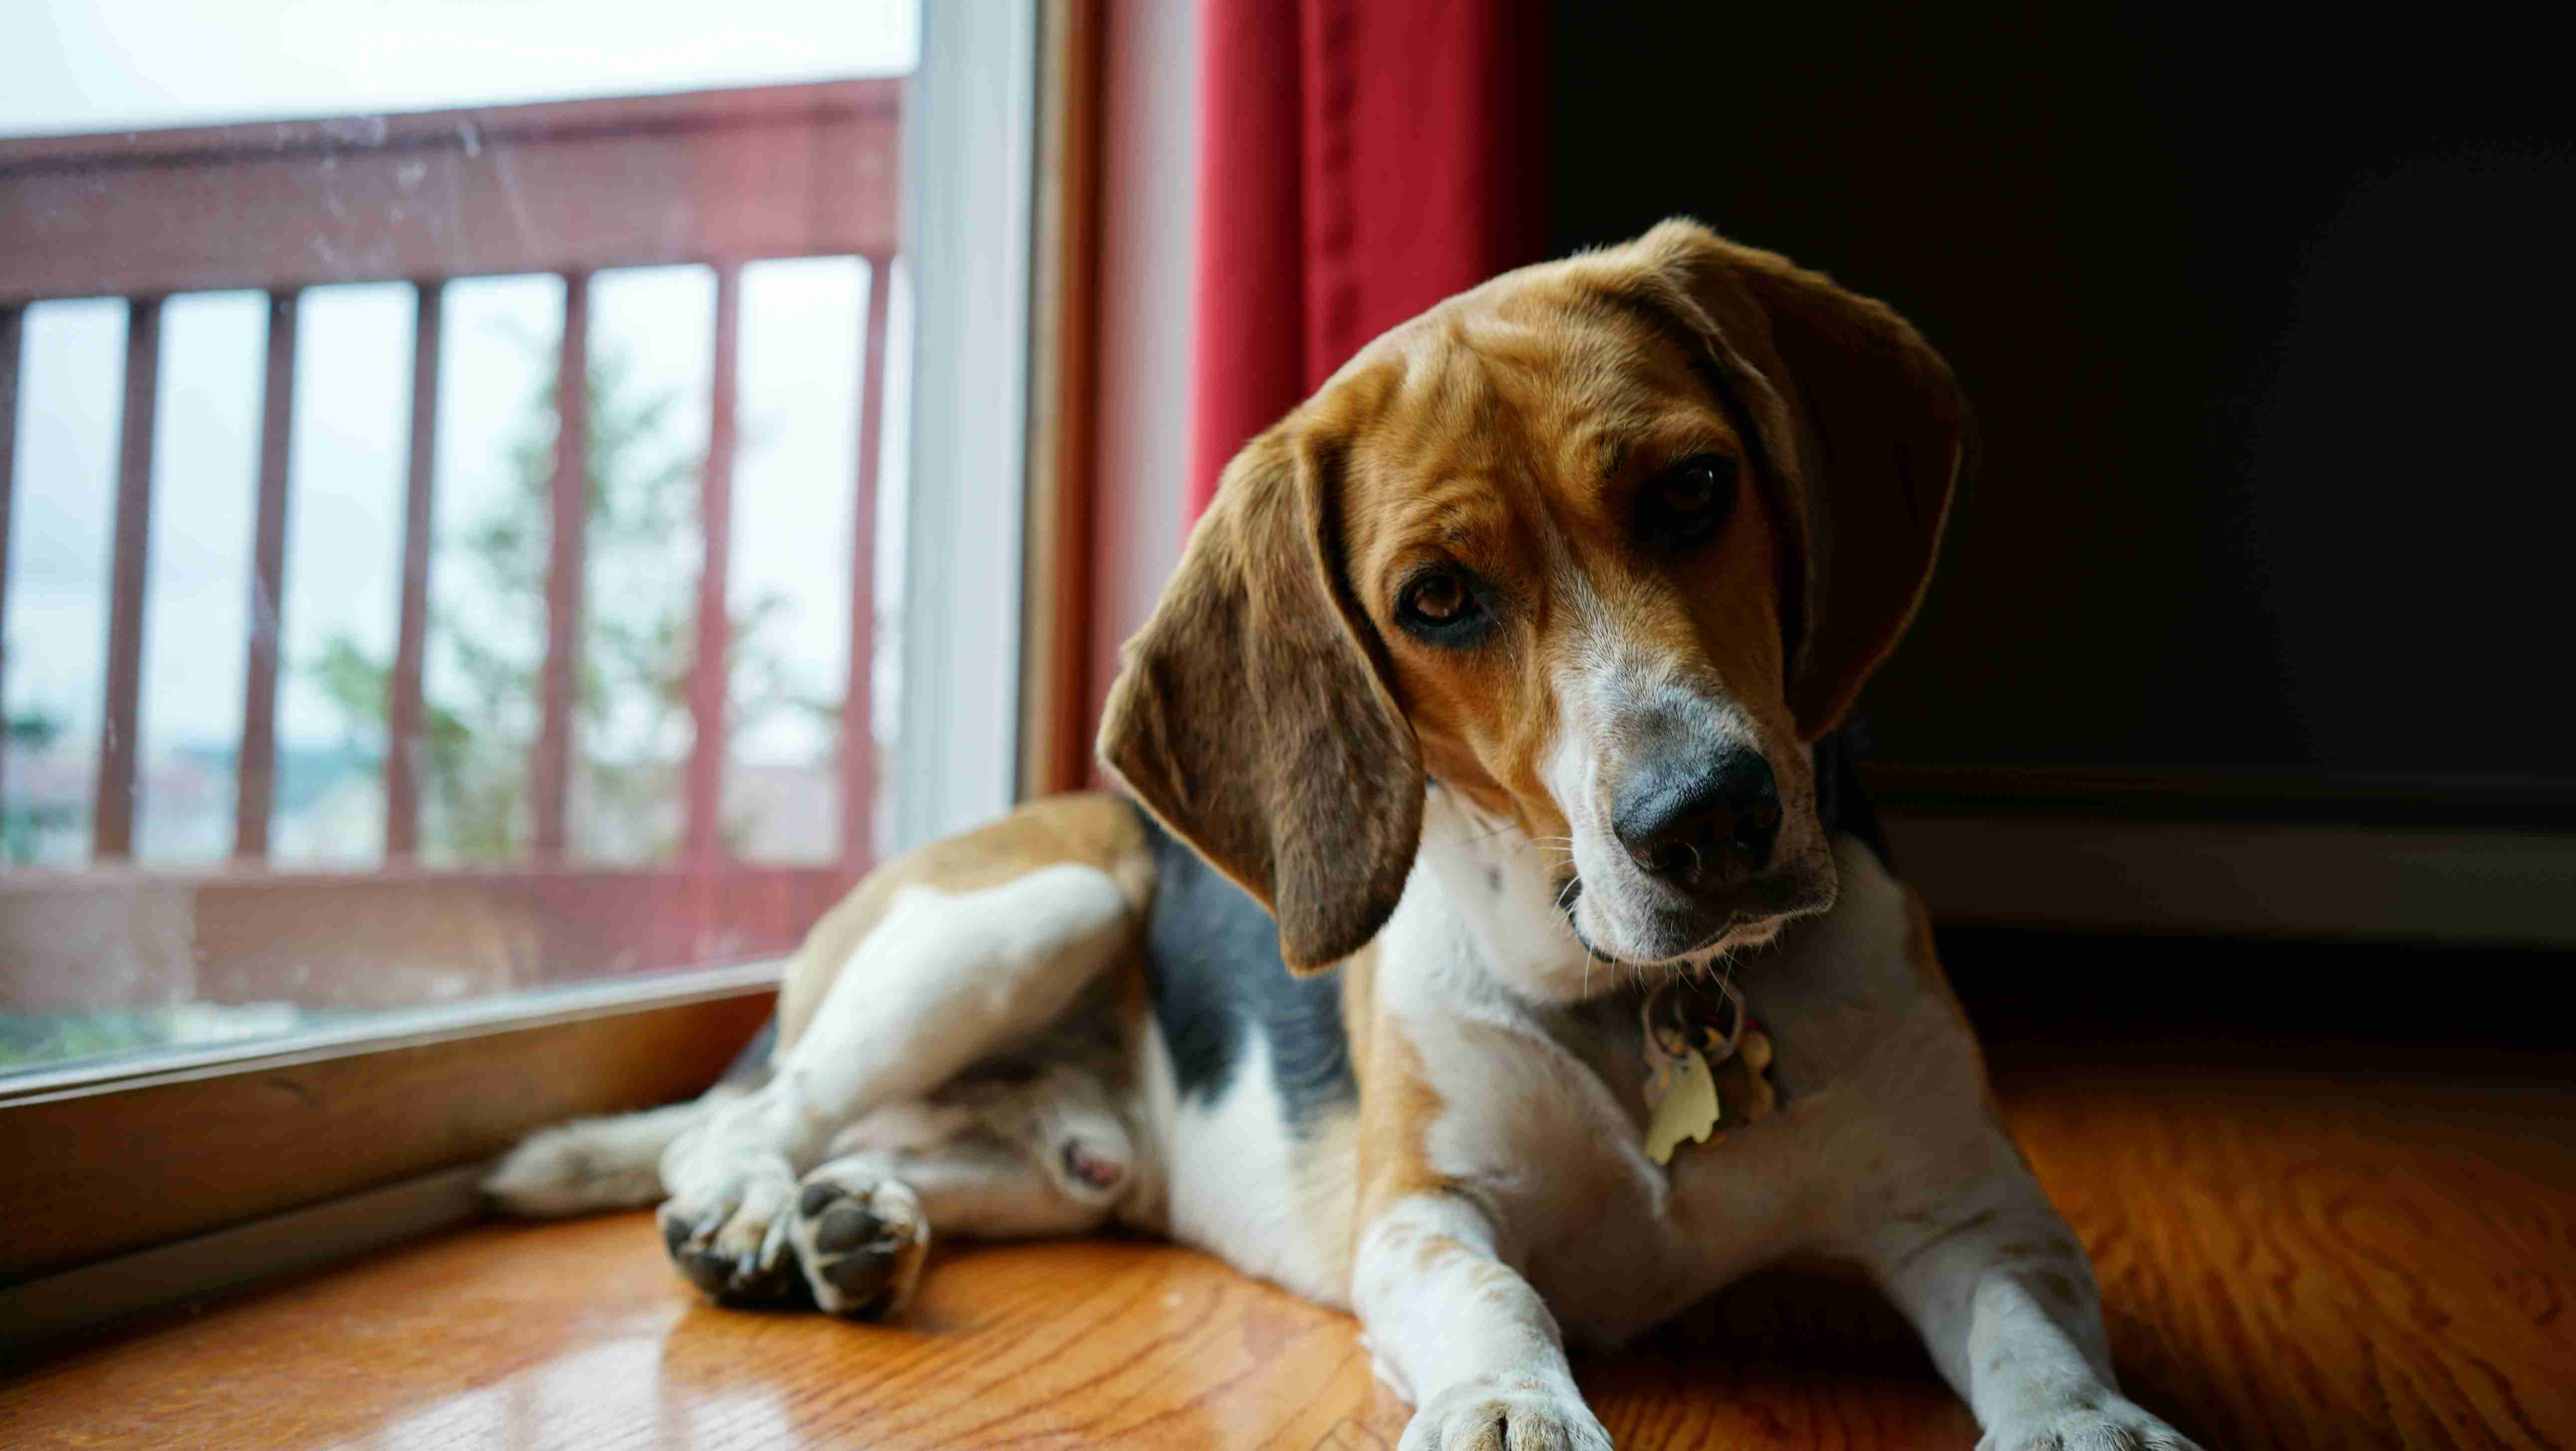 Beagle Training Tips: How to Manage Your Beagle's Stubbornness During Training Sessions